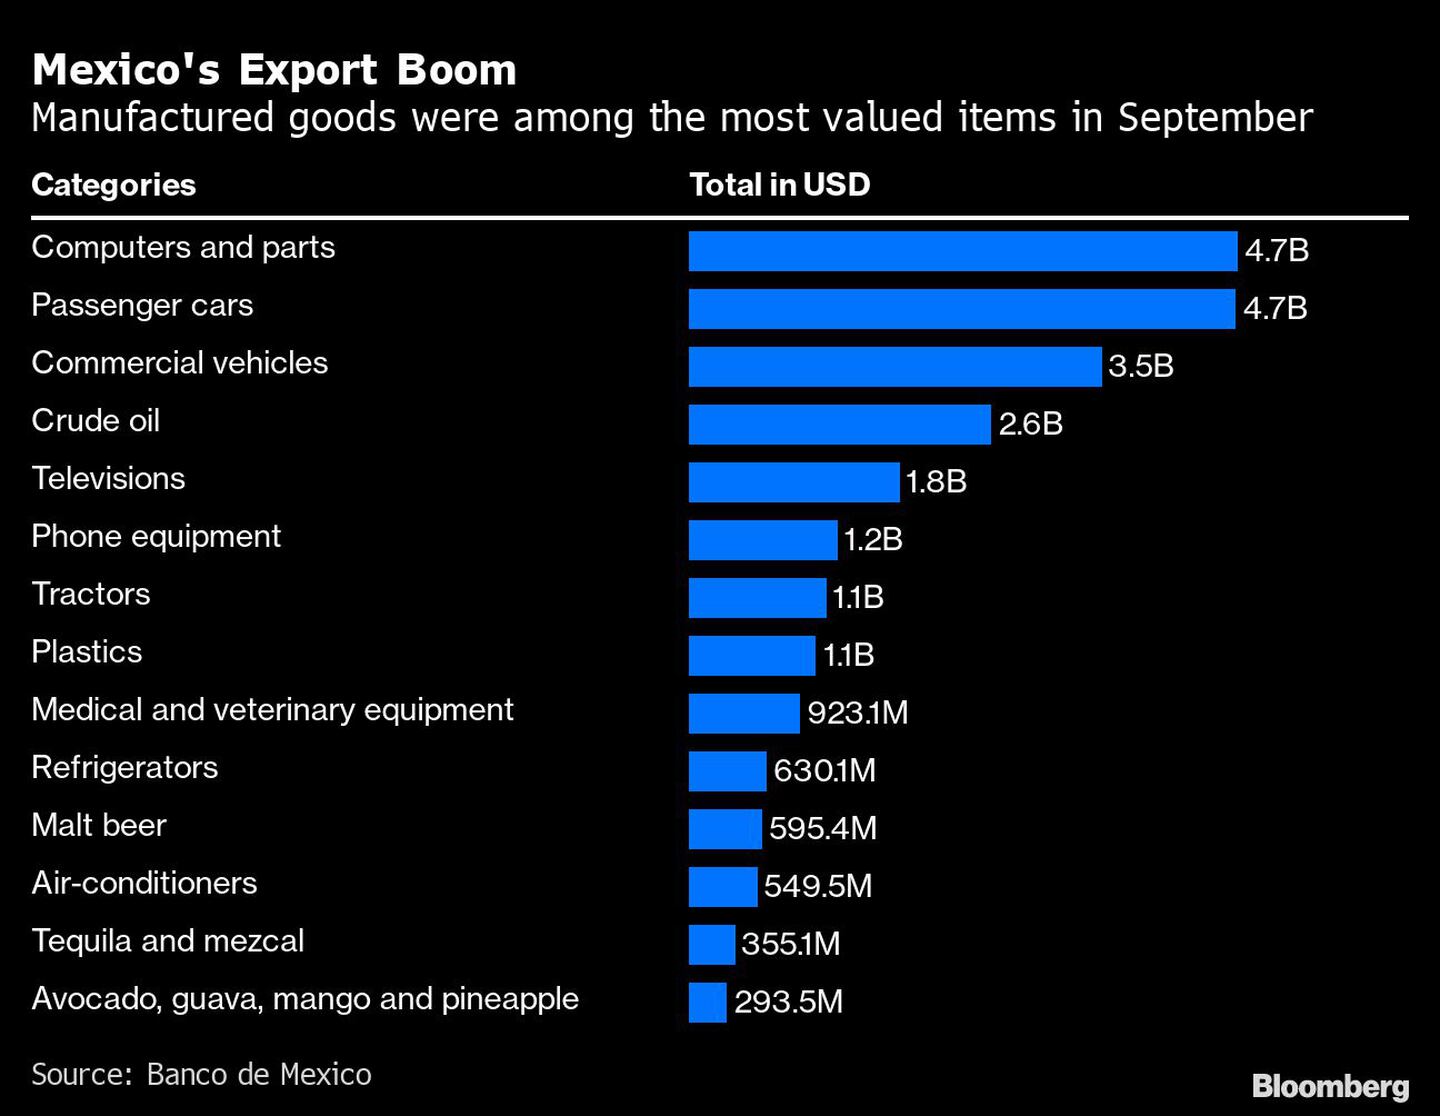 Mexico's Export Boom | Manufactured goods were among the most valued items in Septemberdfd